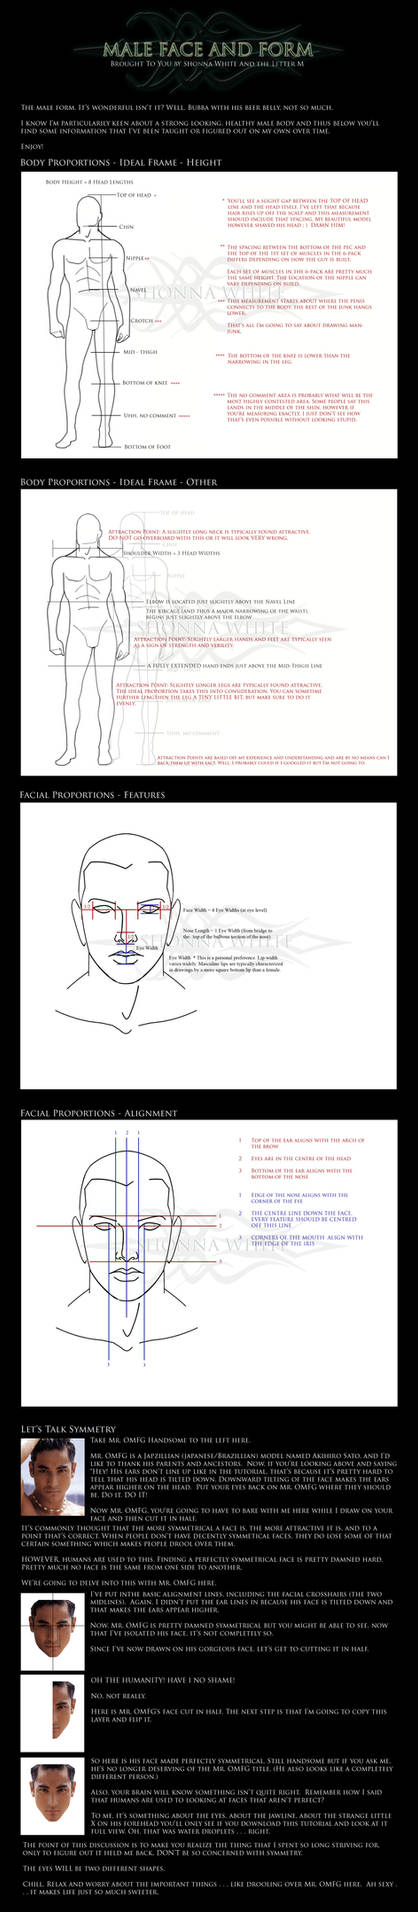 Male Form and Face Tutorial